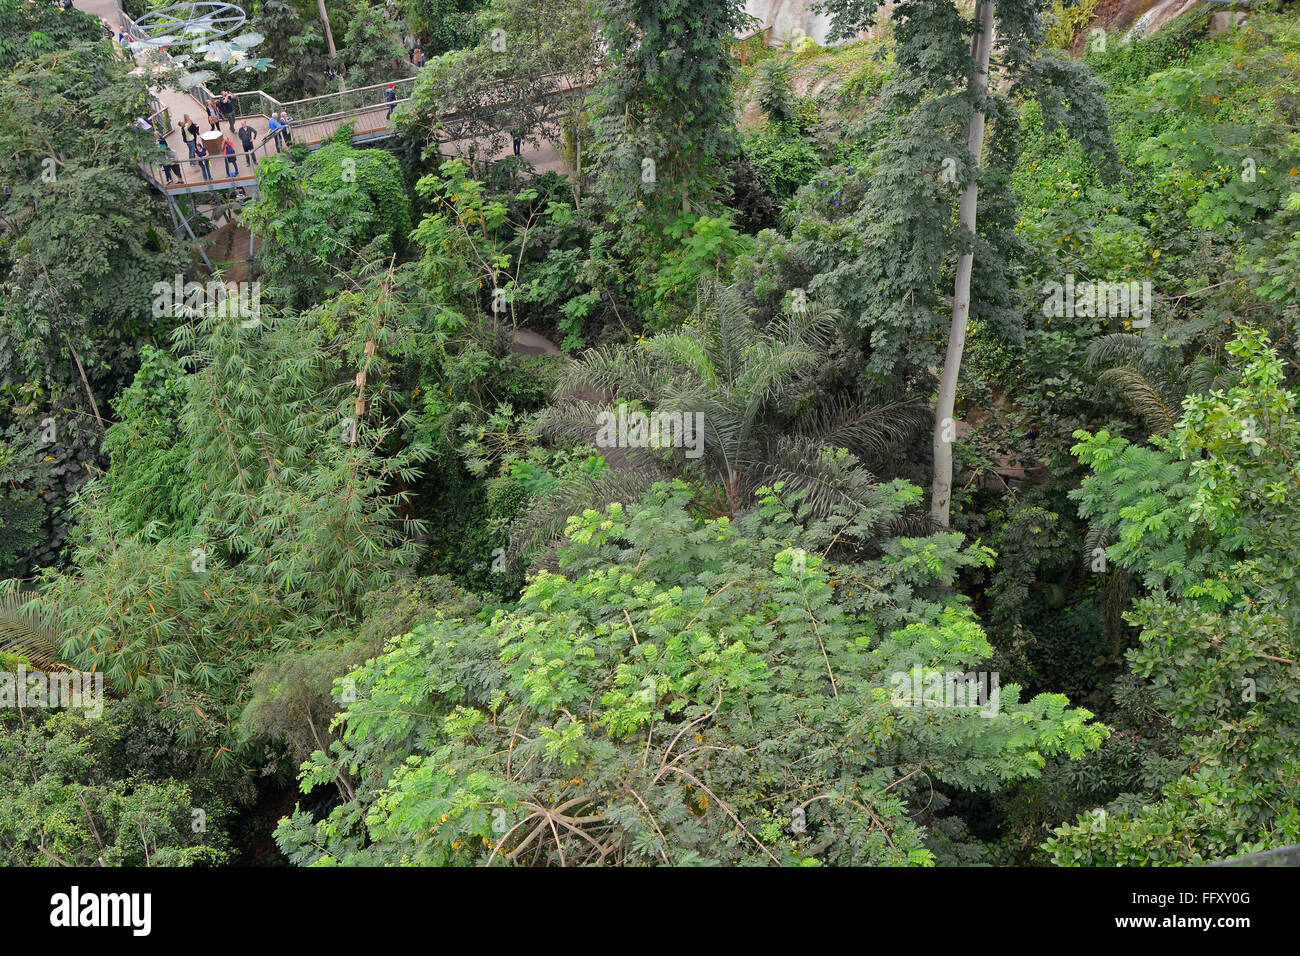 Inside the Eden Project Tropical Forest BioDome. Birds eye view looking down with people on paths Stock Photo